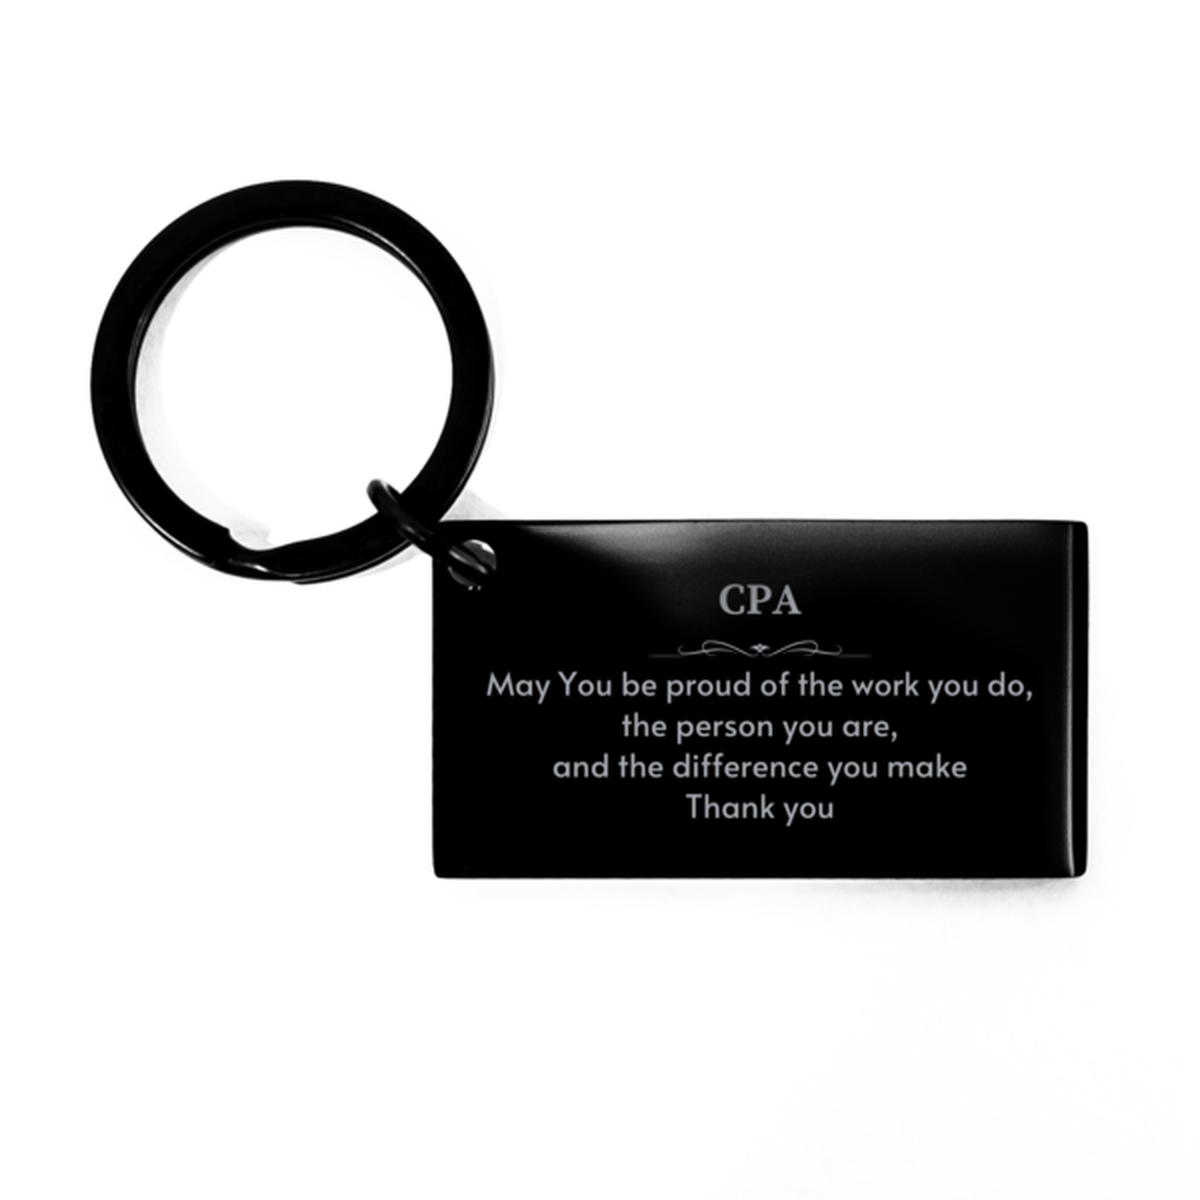 Heartwarming Keychain Retirement Coworkers Gifts for CPA, Fitness Trainer May You be proud of the work you do, the person you are Gifts for Boss Men Women Friends